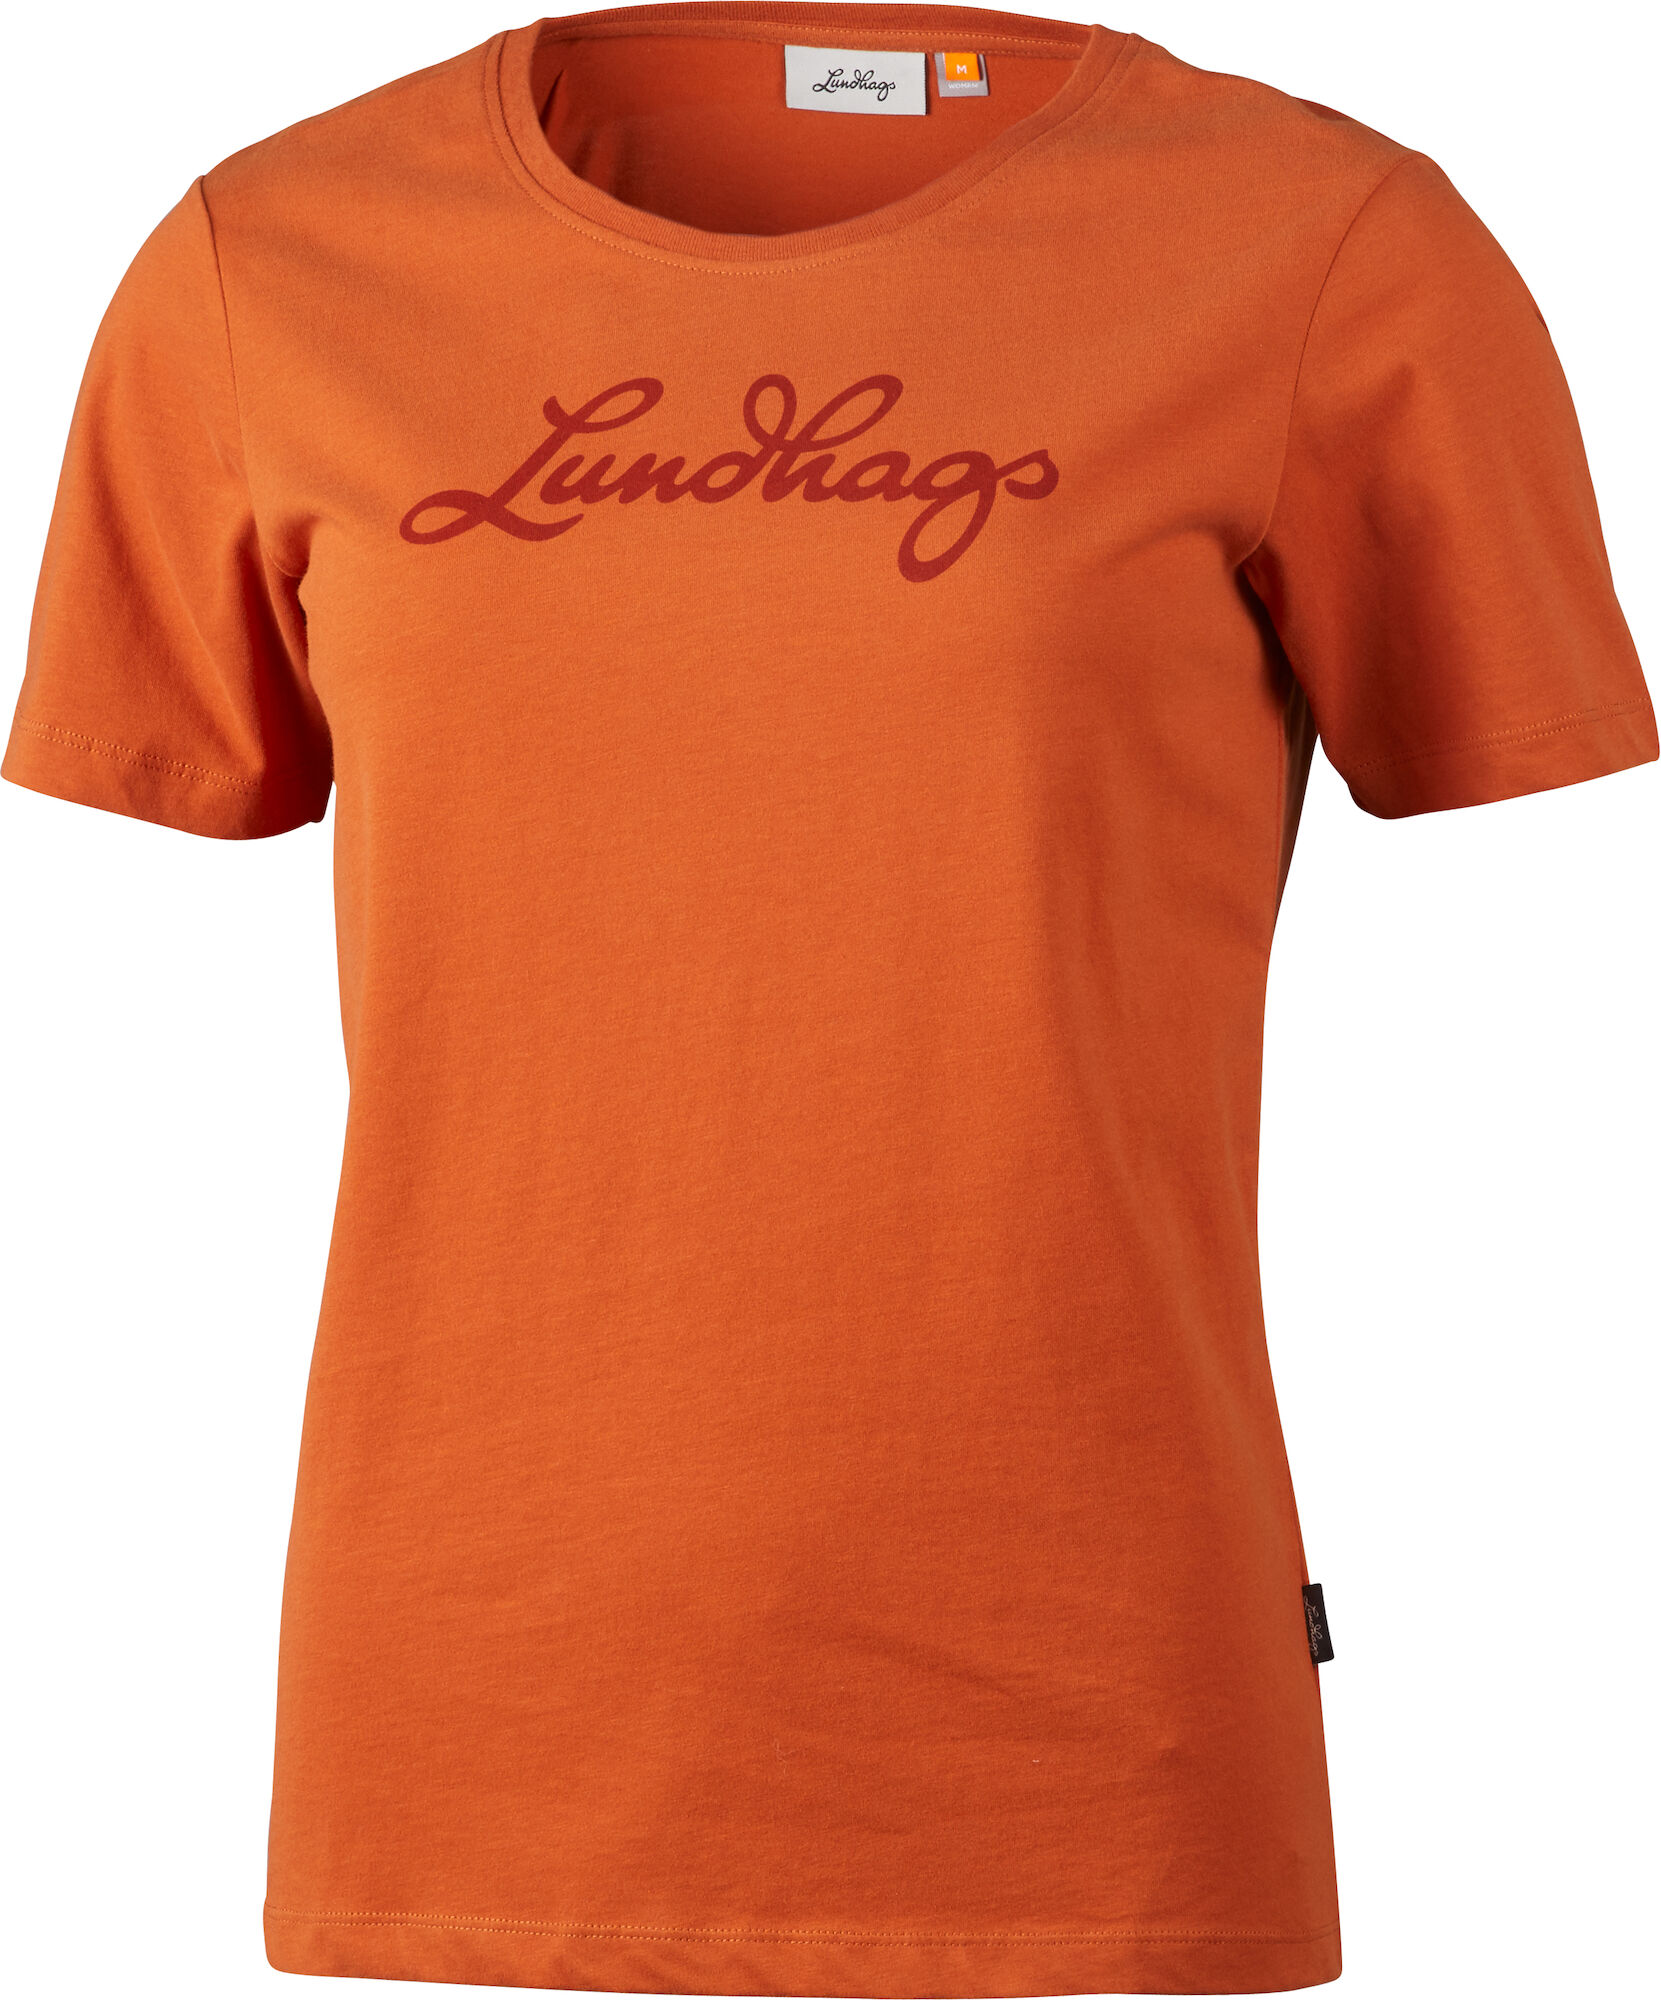 Lundhags Ws Tee